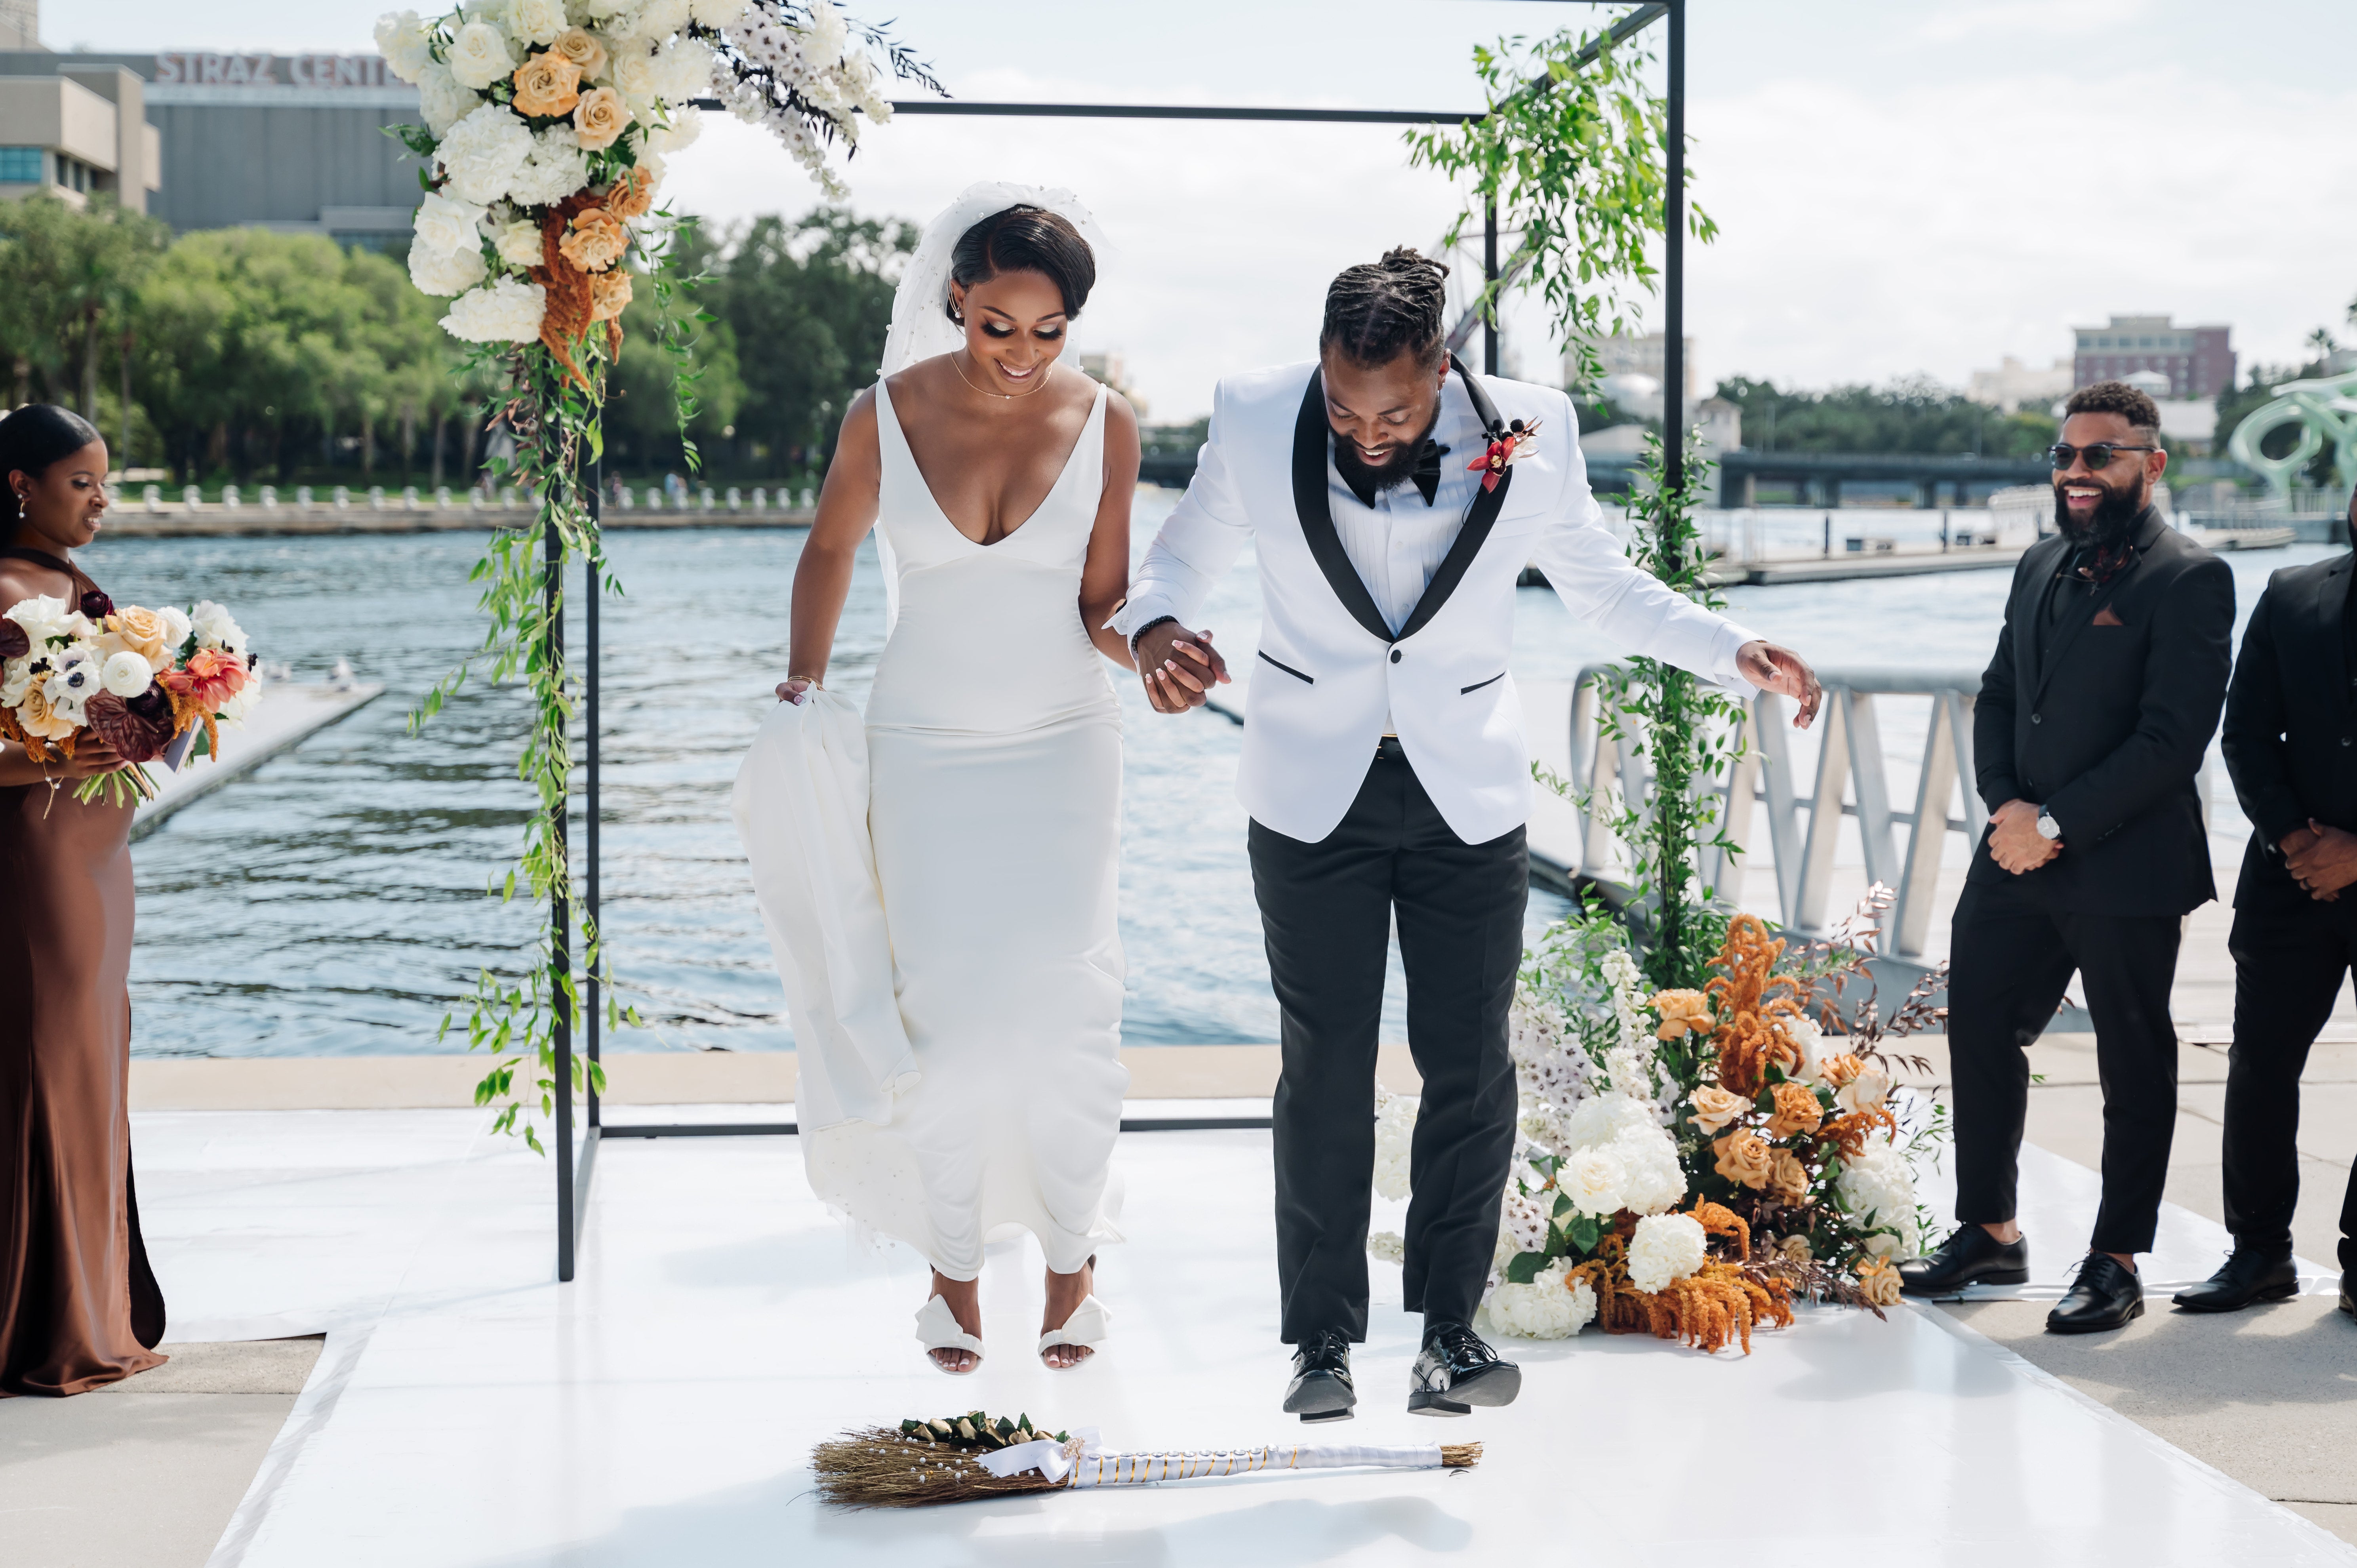 Bridal Bliss: The Bride And The Groom Both Changed Their Last Name For This Tampa Wedding